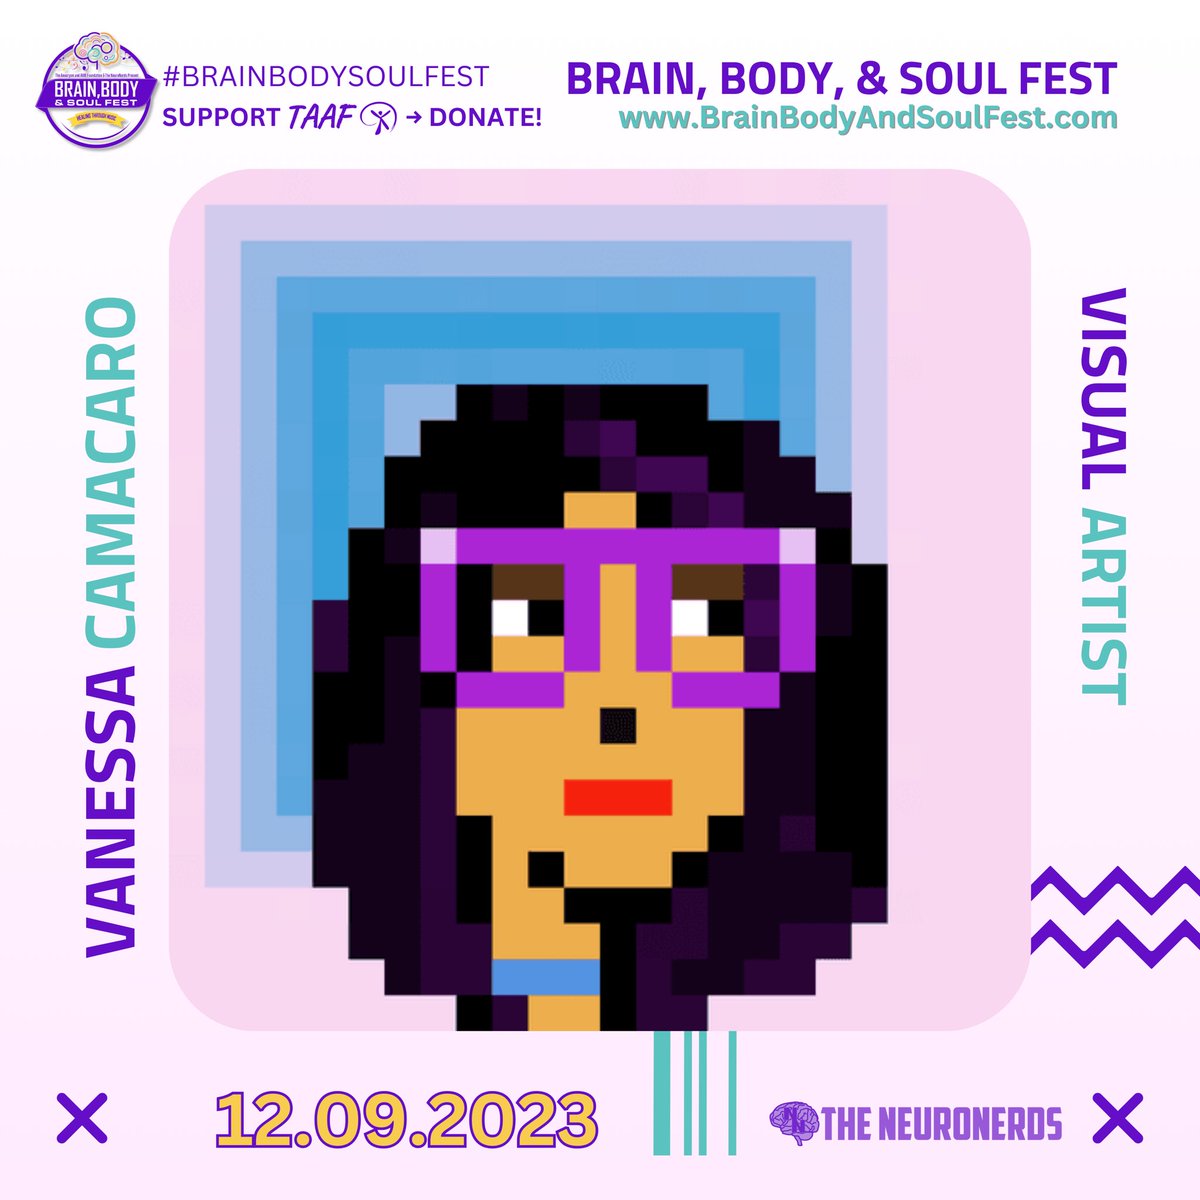 Don’t miss out to be a part of the change at the Brain, Body & Soul Fest in @Spatial_io! 💕✨

I’m thrilled to be organizing this event along @MyCreativeOwls @TAAF and 
@TheNeuroNerds! 

Together, we can uplift the brain injury community. 

#BrainBodySoulFest #MetaverseEvent